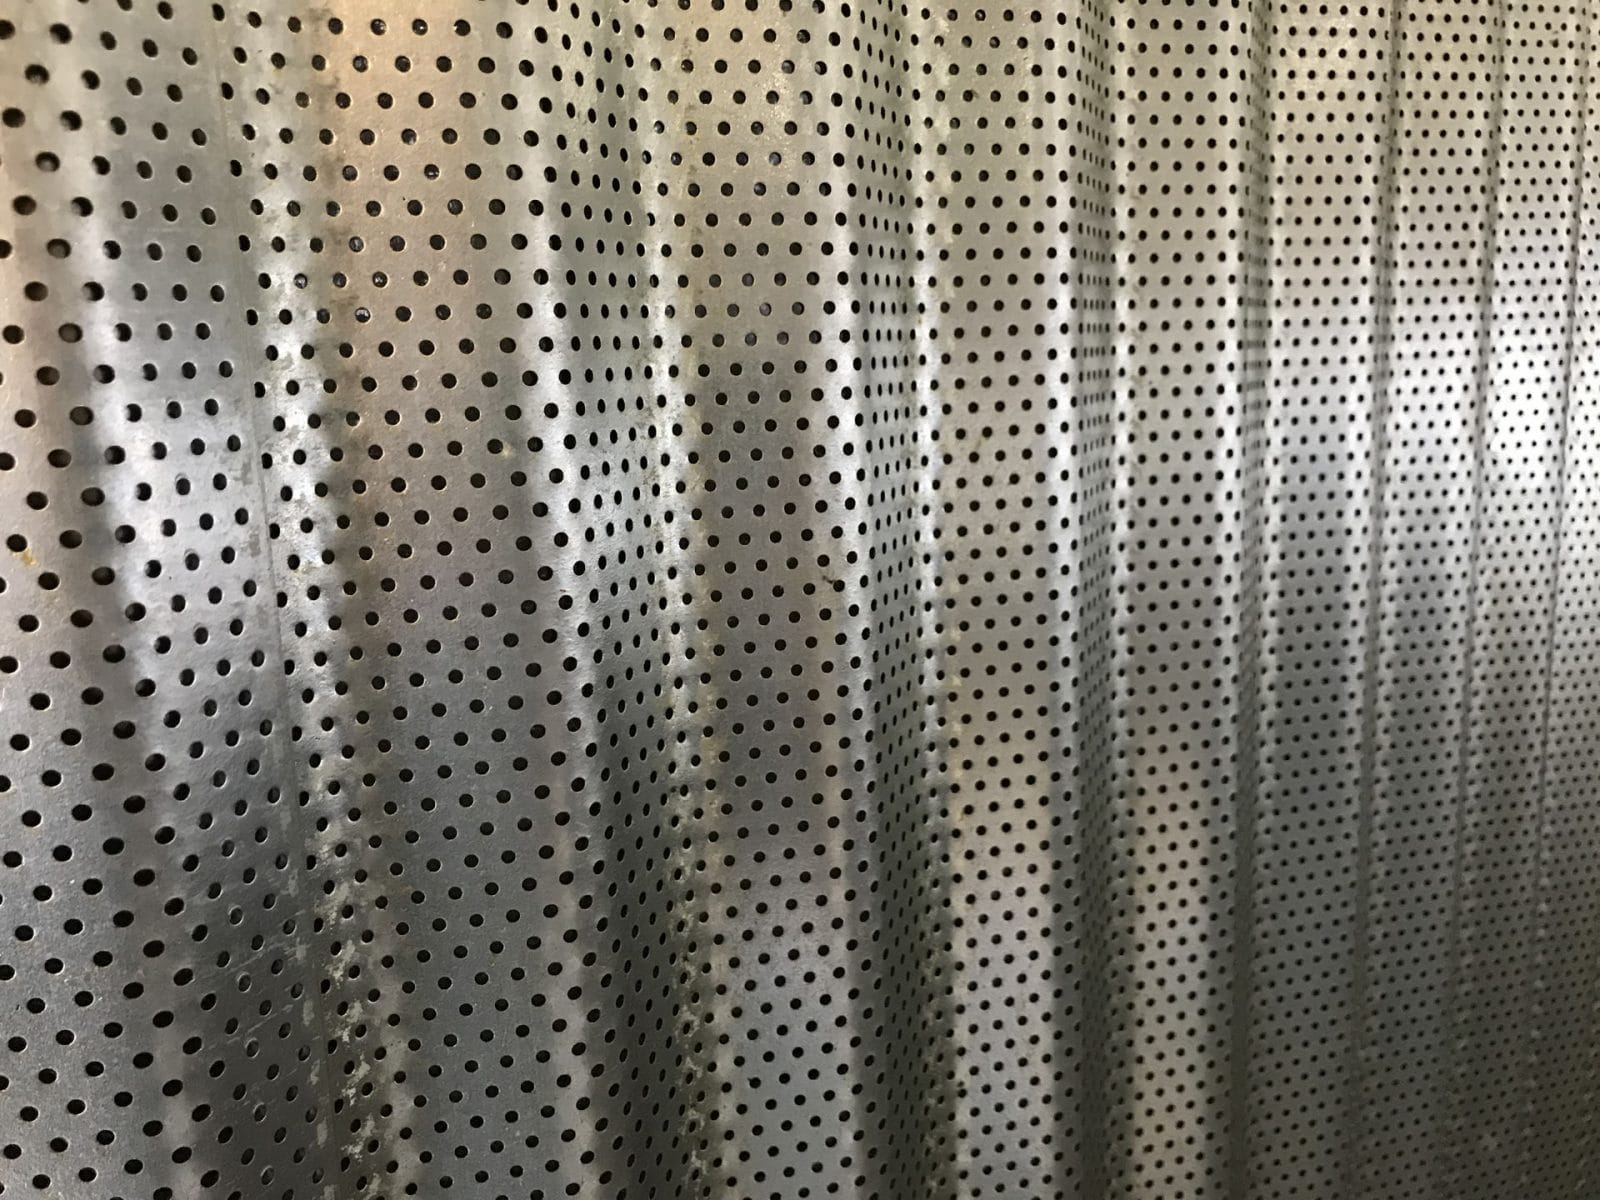 Perforated Metal Manufacturer, illinois metal perforating company, metal services in illinois